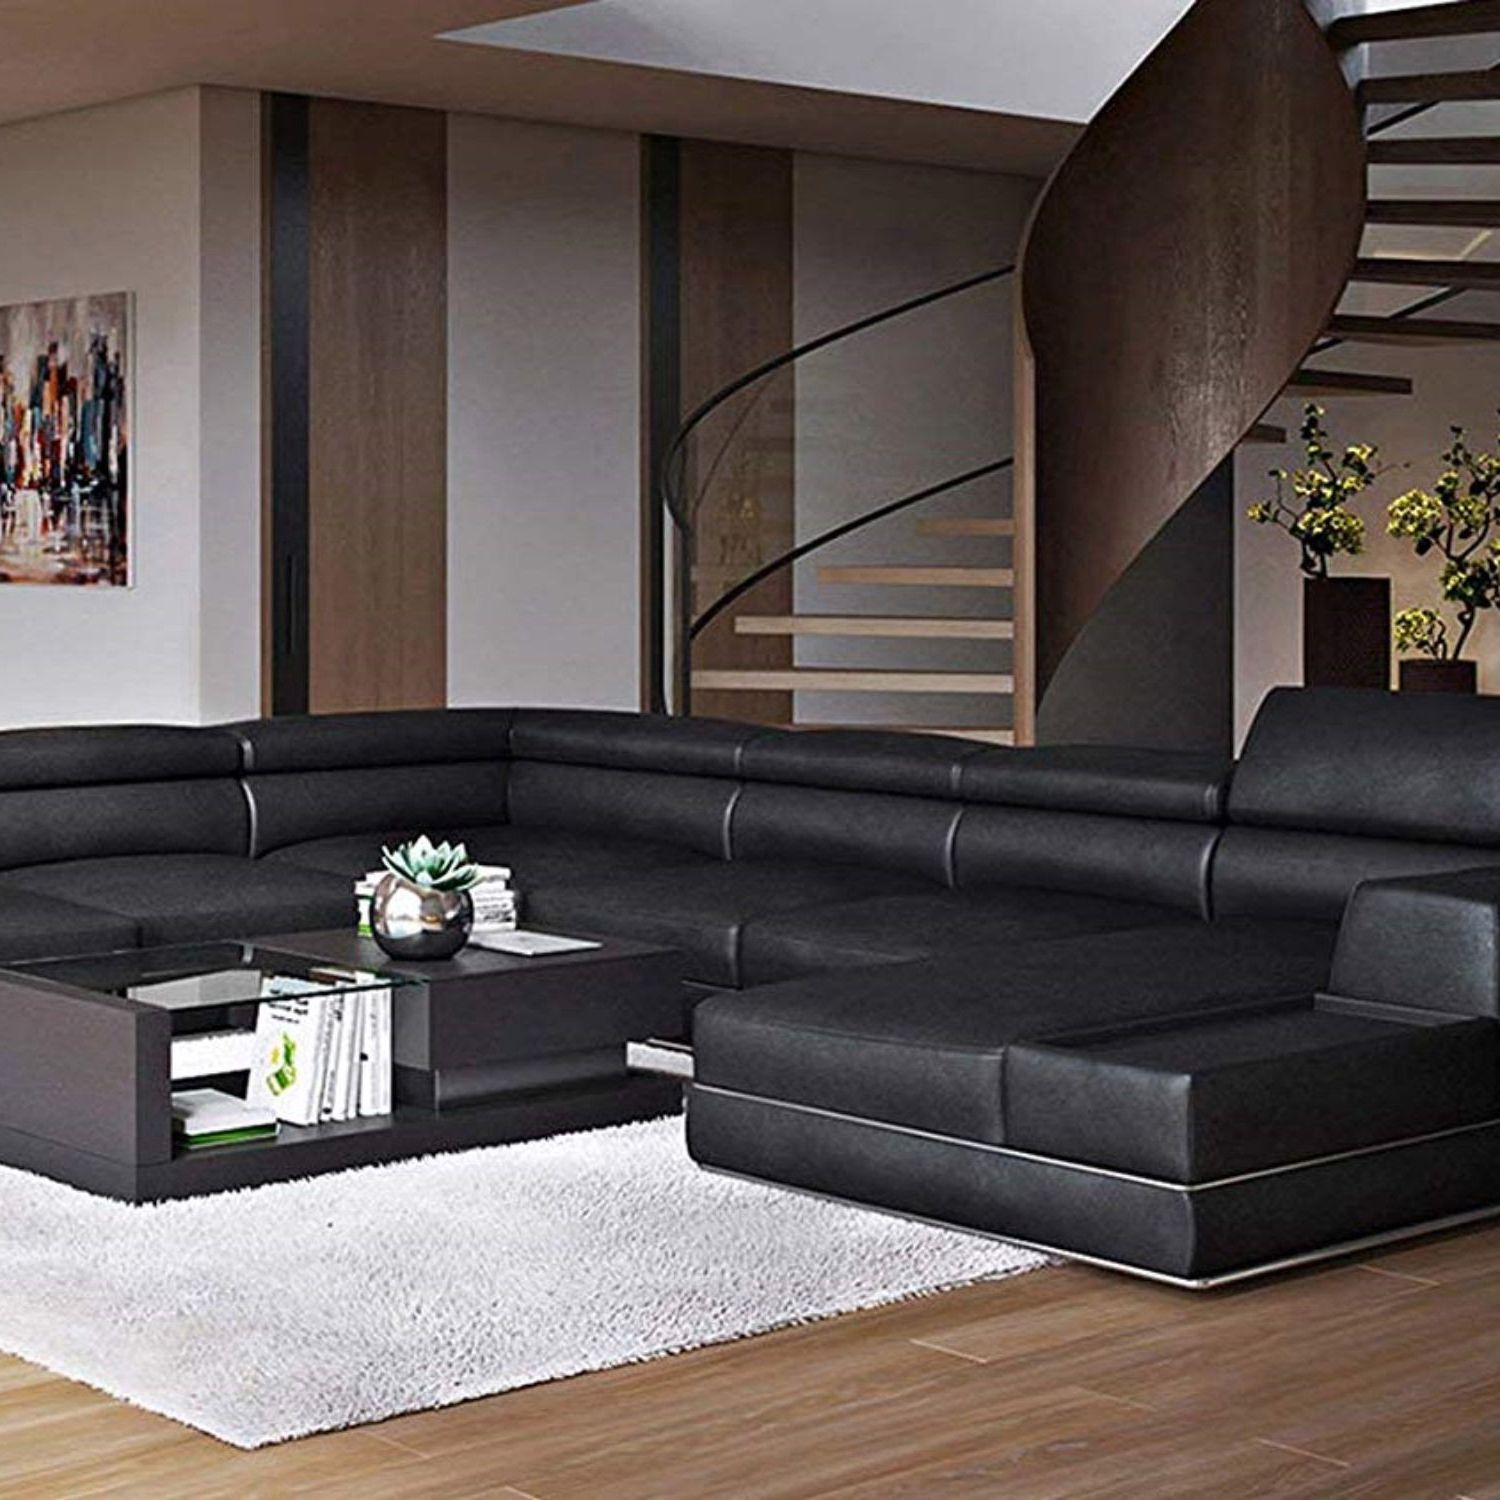 Modern Black Leather Sectional Sofa Living Room Couch Sleek In Right Facing Black Sofas (View 6 of 20)